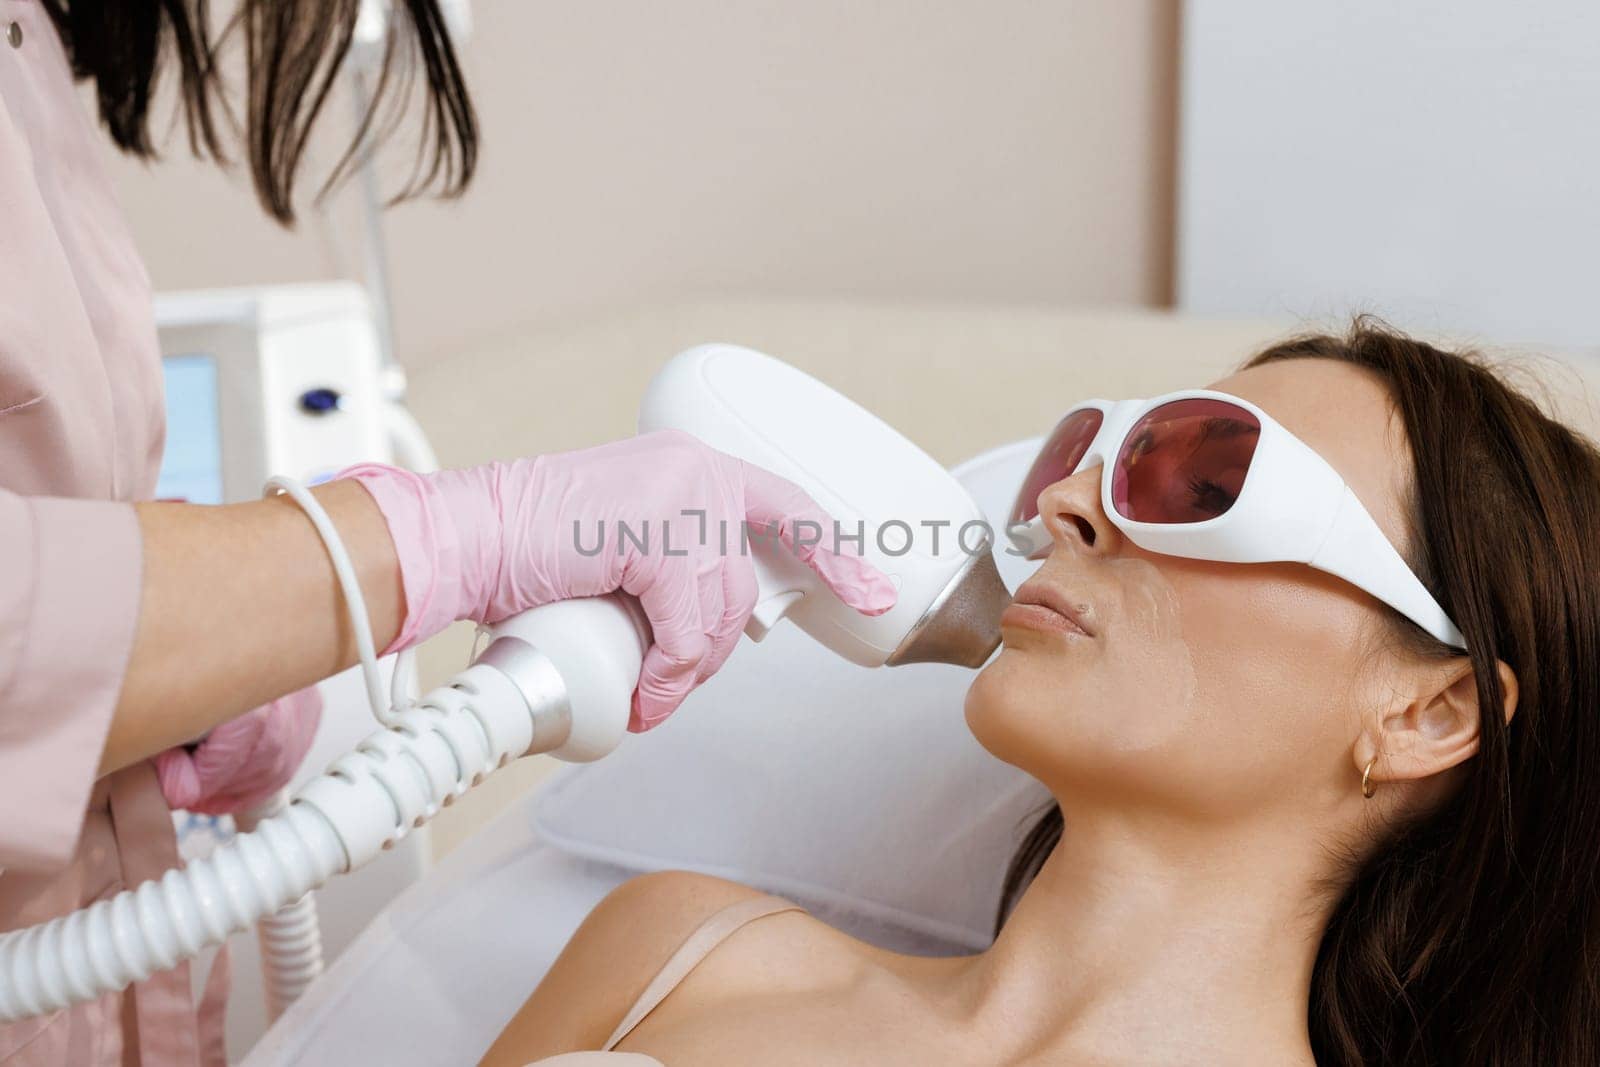 Facial hair removal. Woman patient in glasses receiving a laser hair removal procedure. Apparatus for depilation. Skin care, cosmetic procedures.